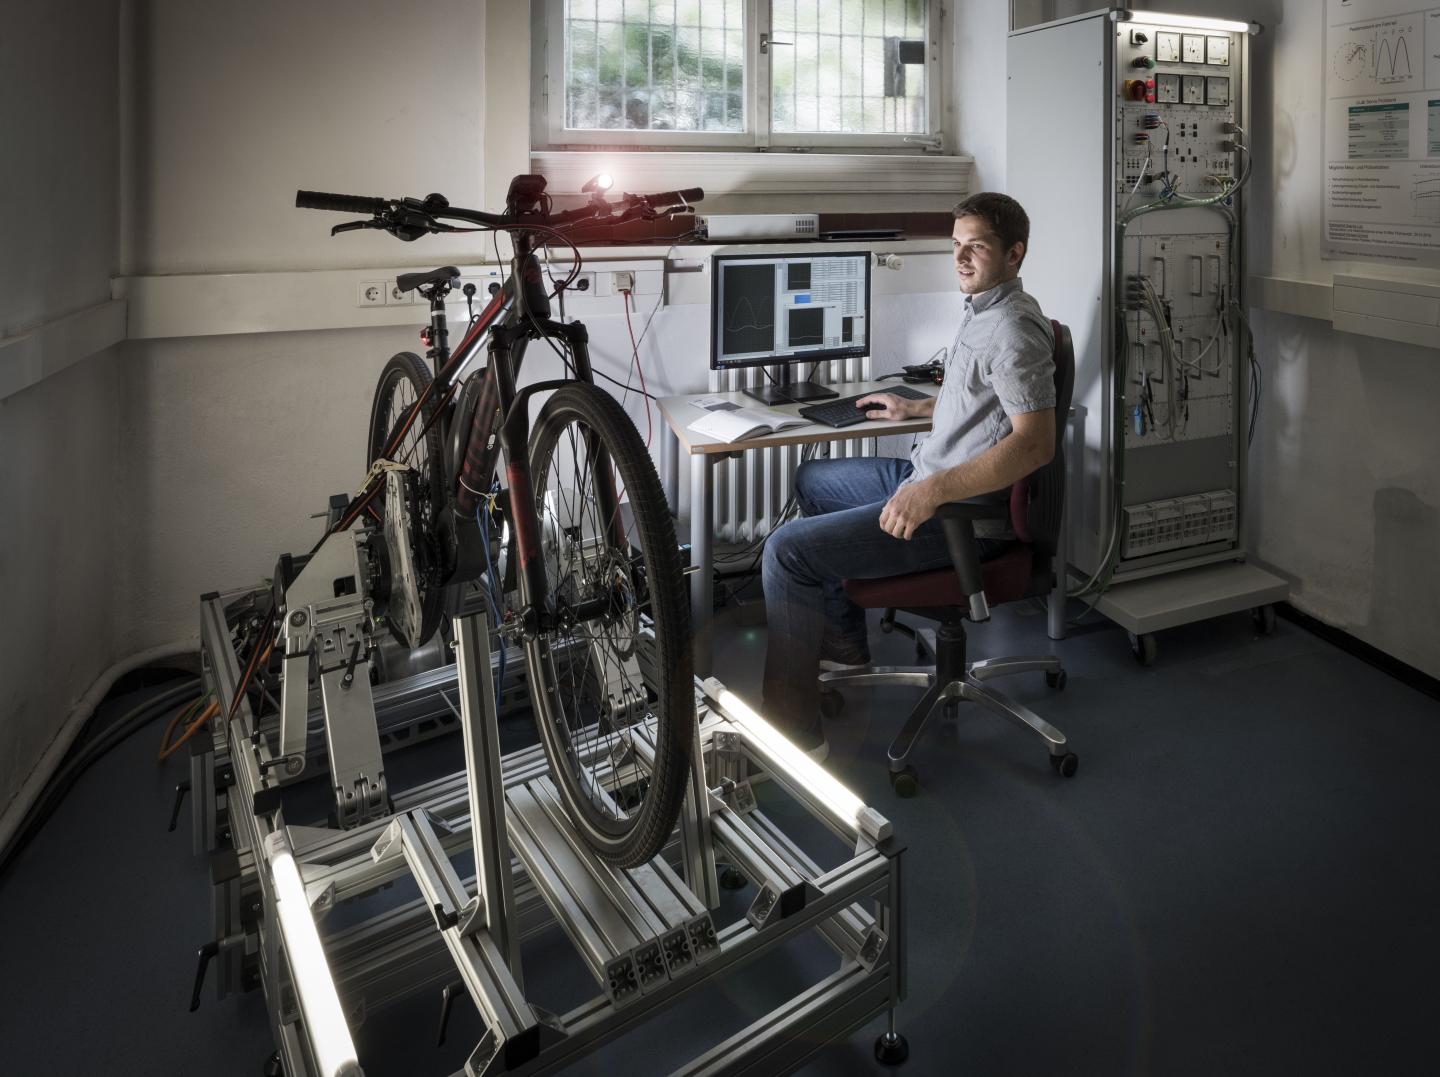 Researchers at KIT Are Testing E-Bikes on a Test Bench Commonly Used in the Automotive Industry